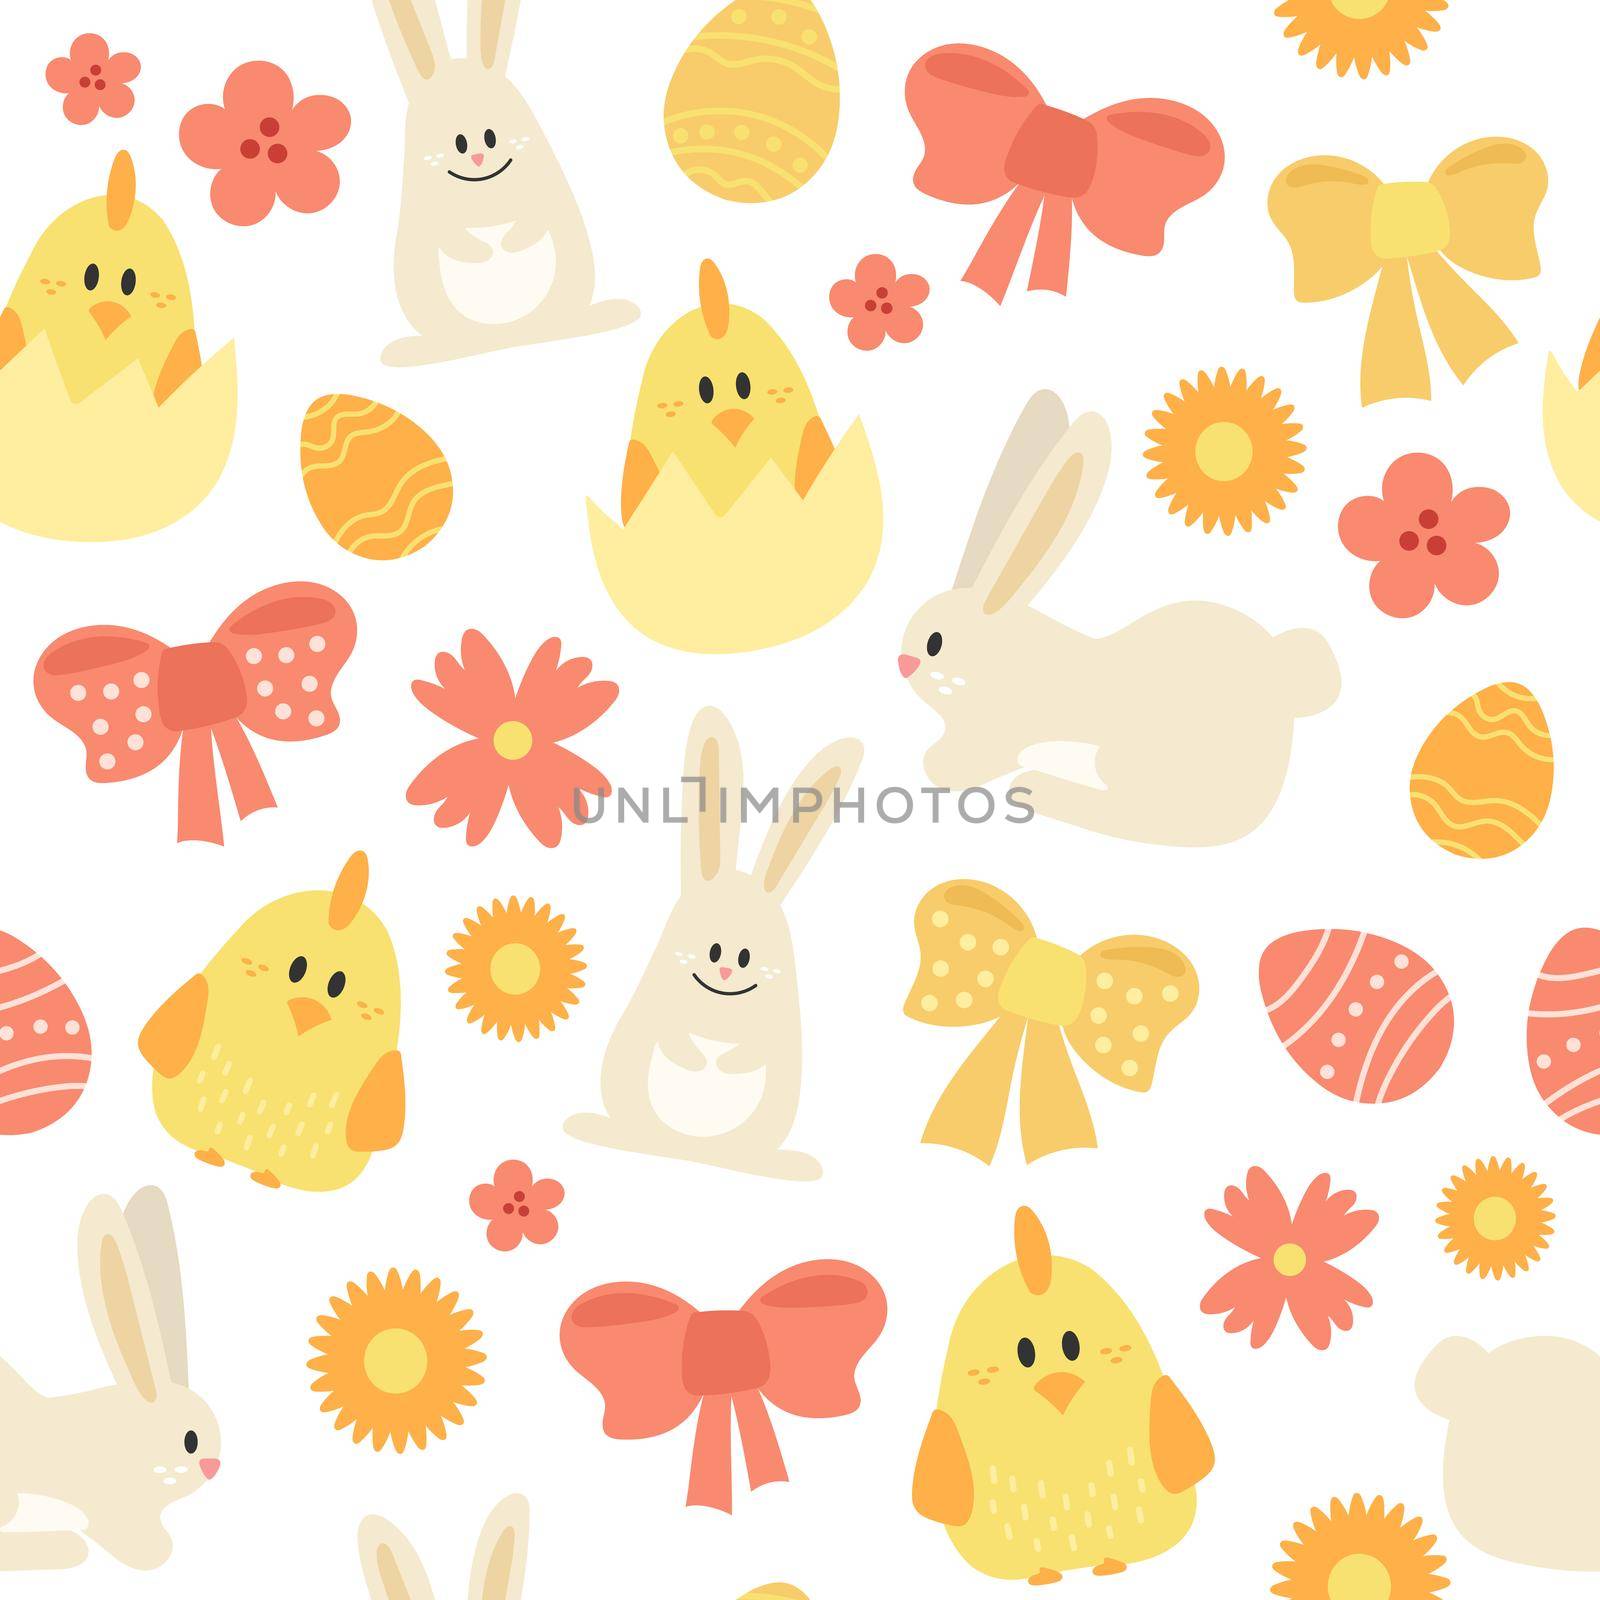 Seamless pattern with Easter eggs, chickens and bunnies. Easter design on white background. Red and yellow colors